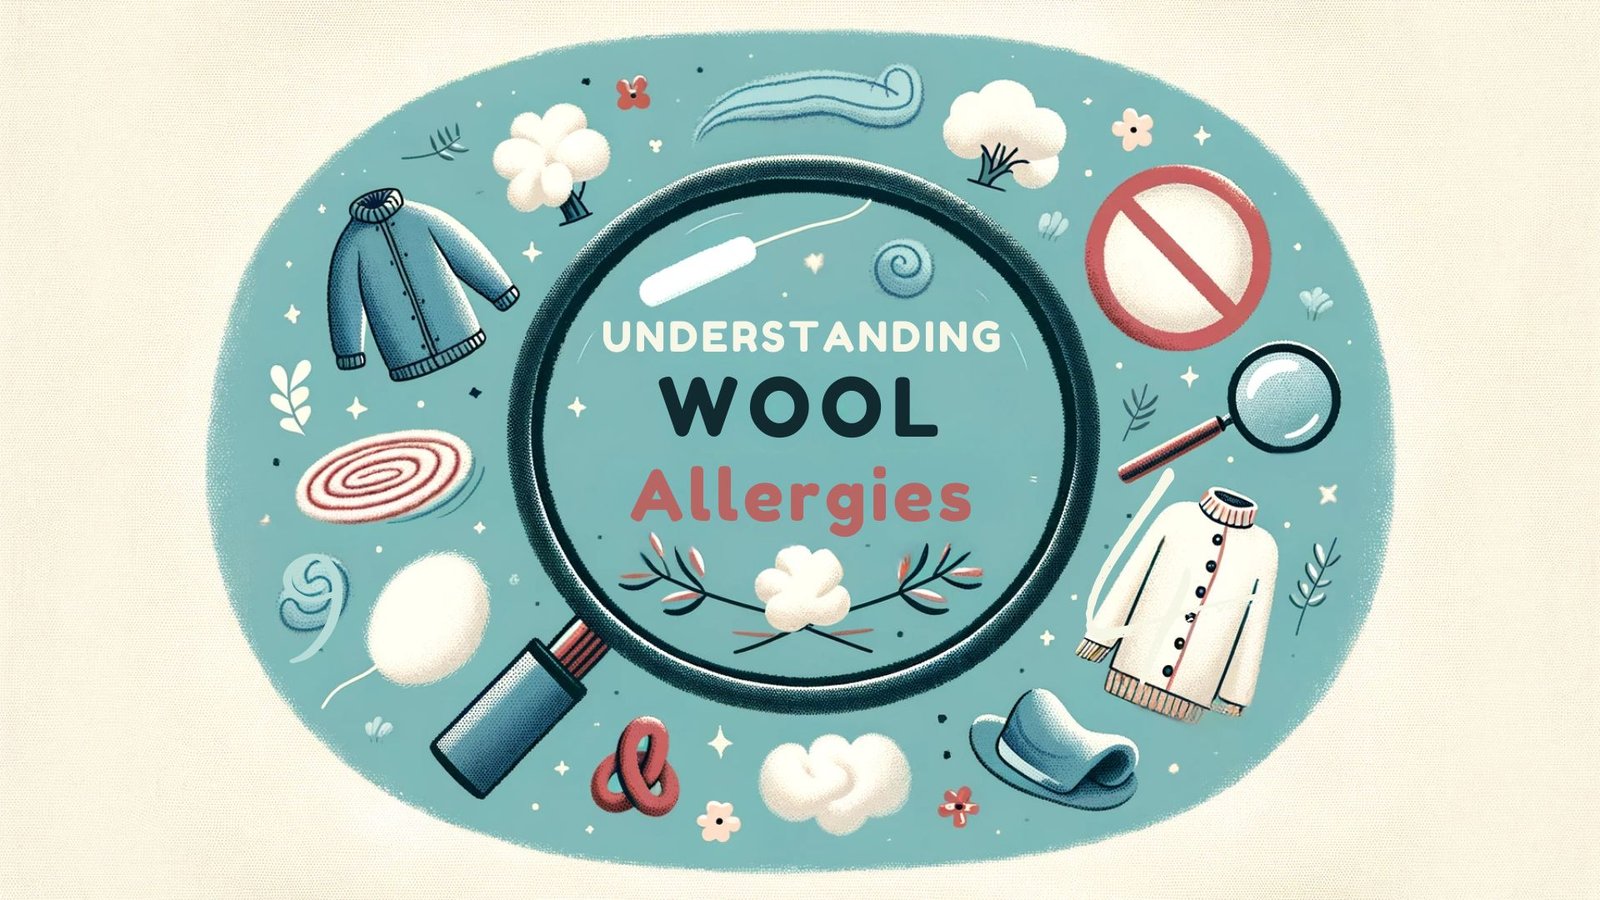 Picture of a wool products and in the middle of the picture there is a text "understanding wool allergies"